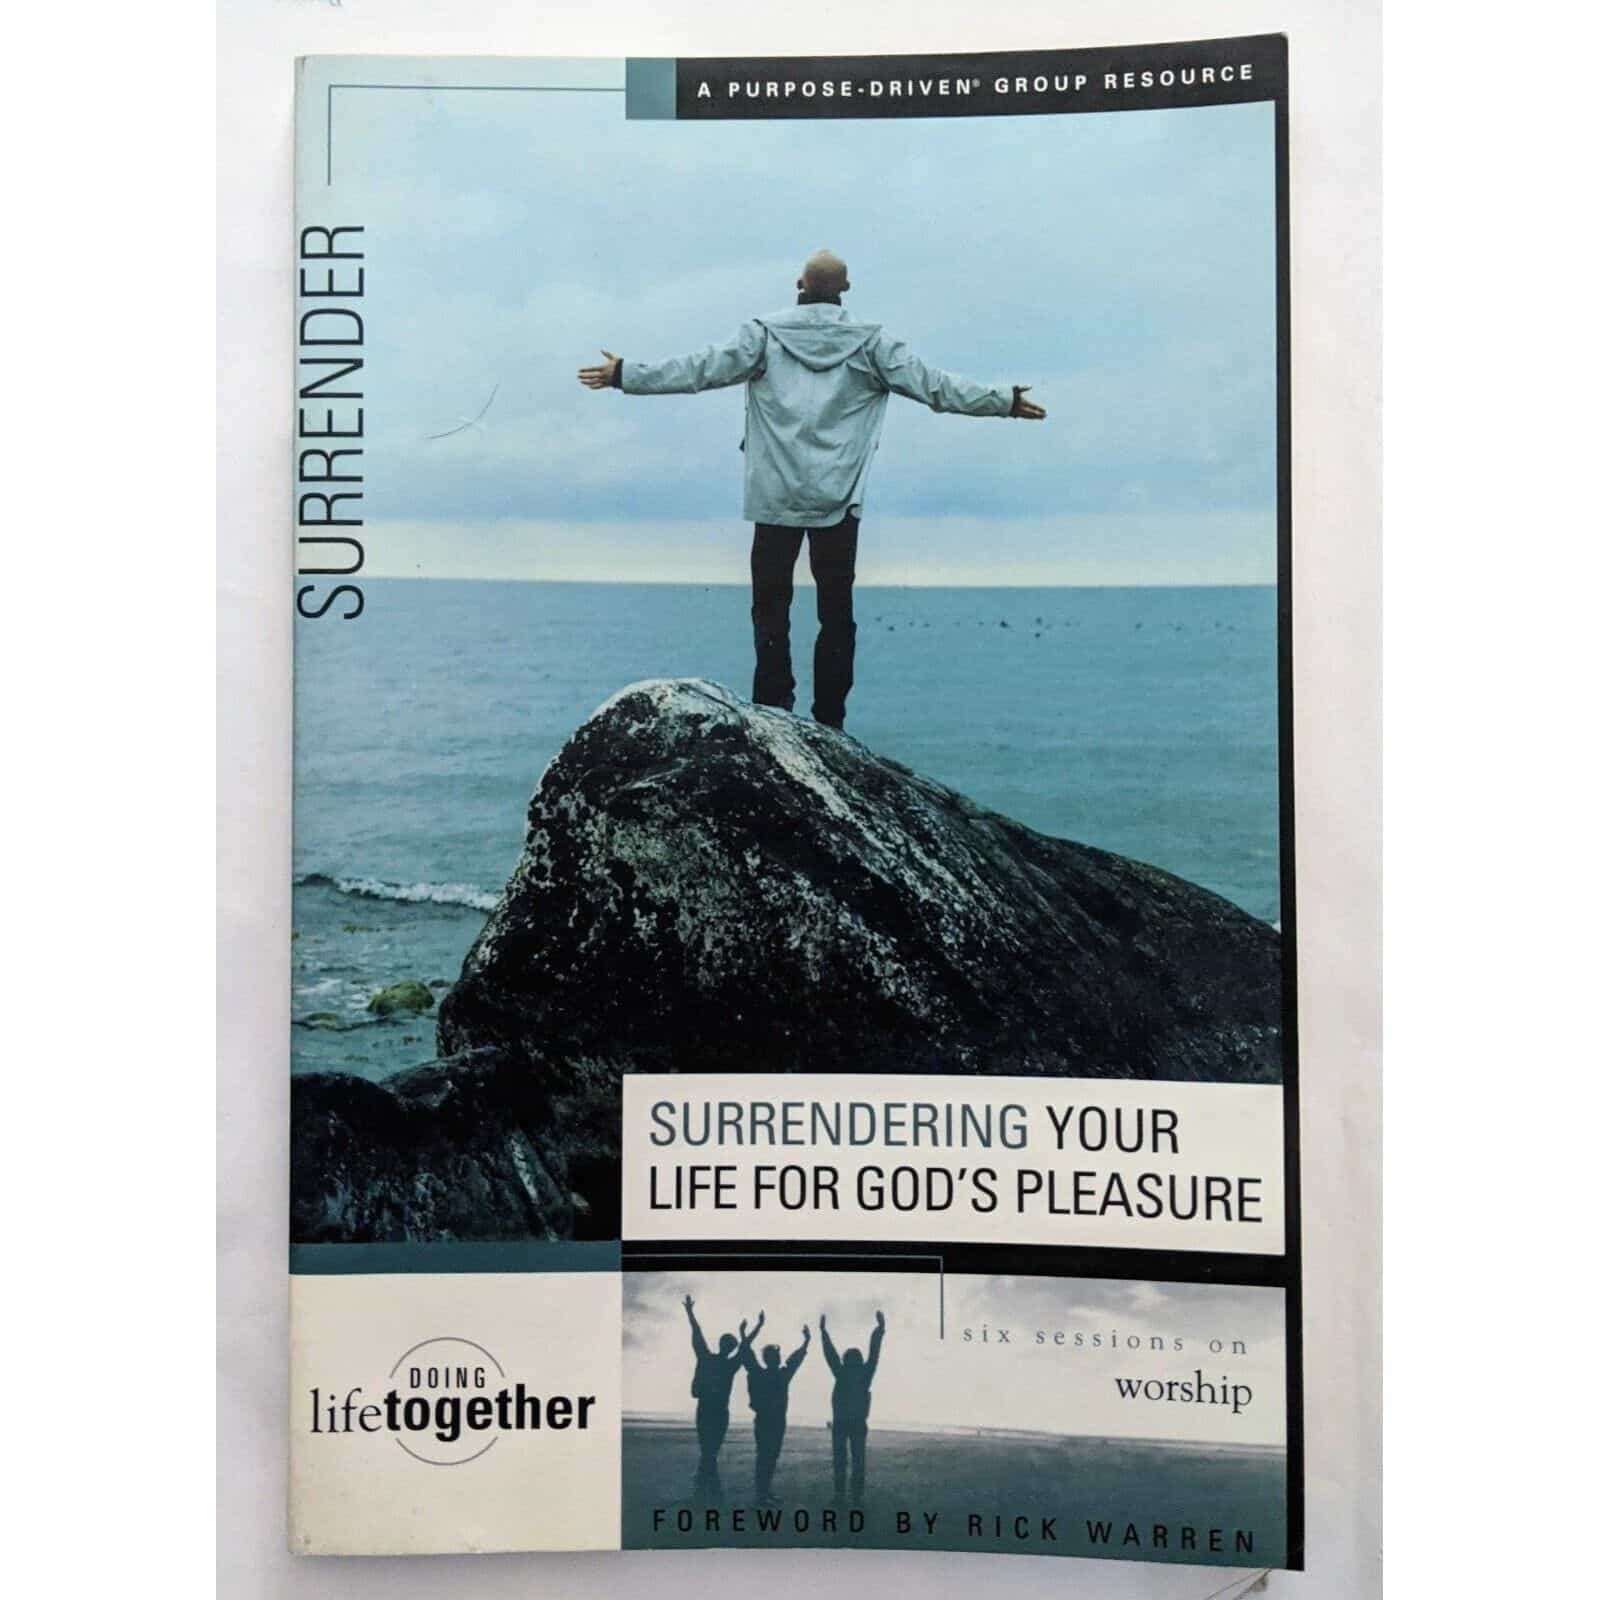 Surrendering Your Life For God’s Pleasure Group Resource Book